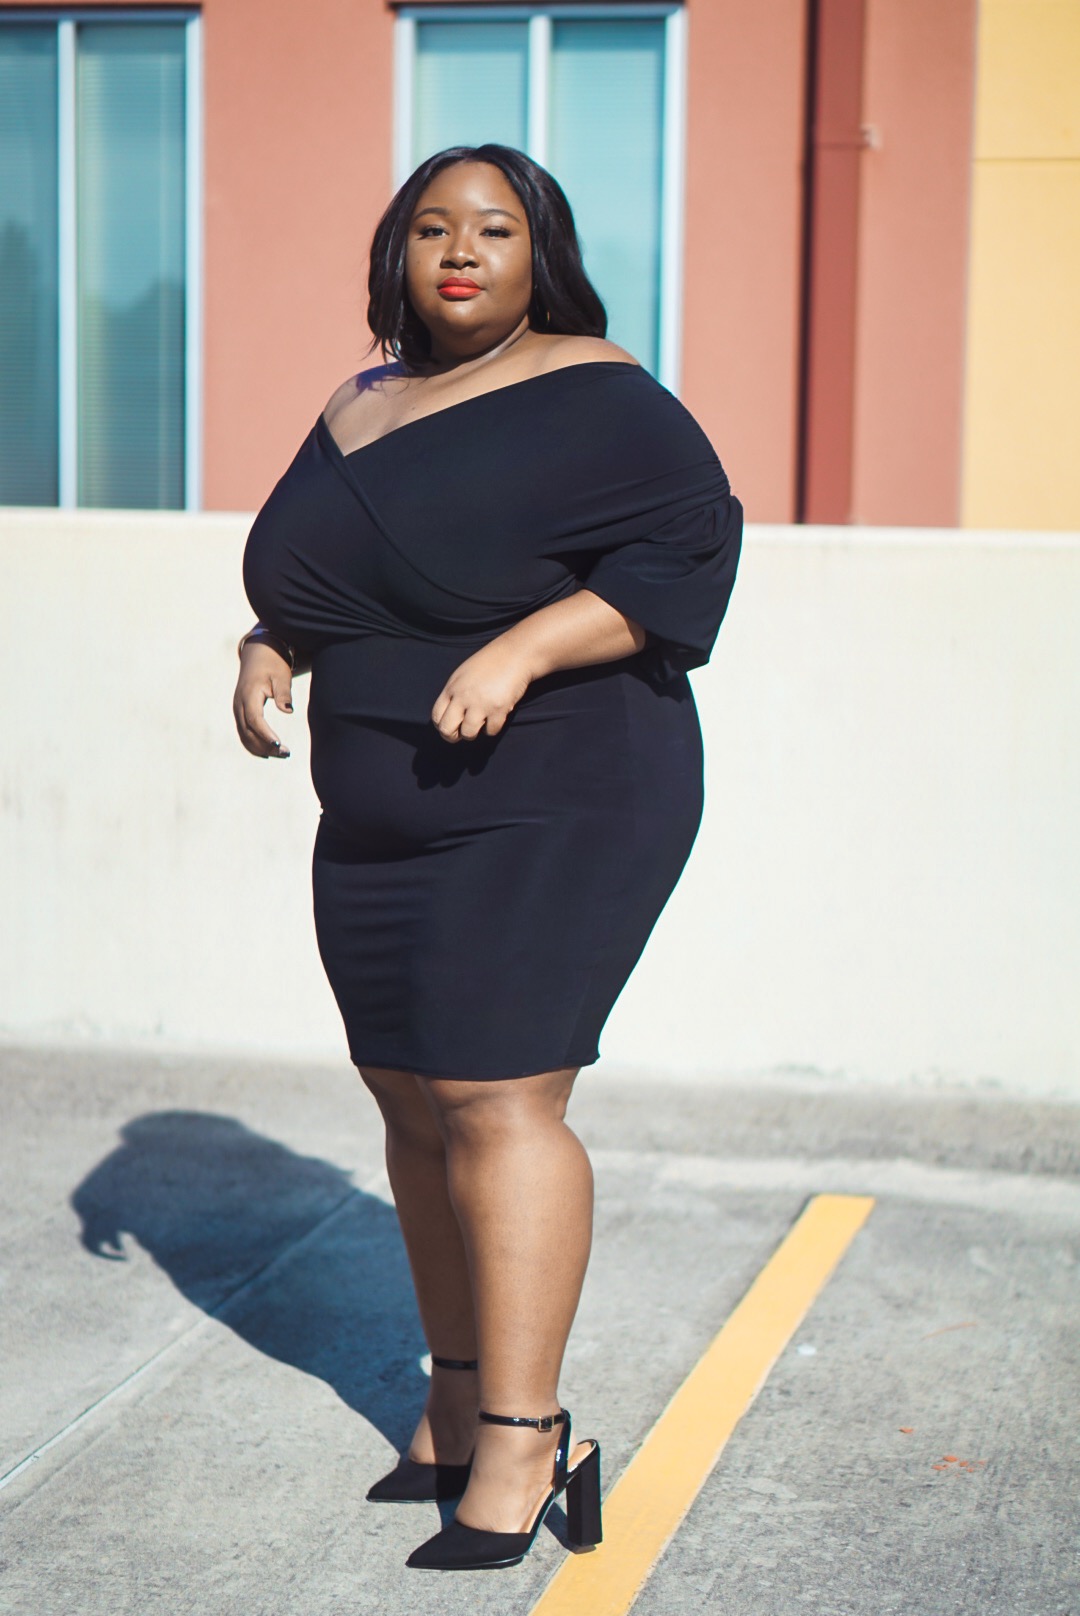 Plus Size Outfits
